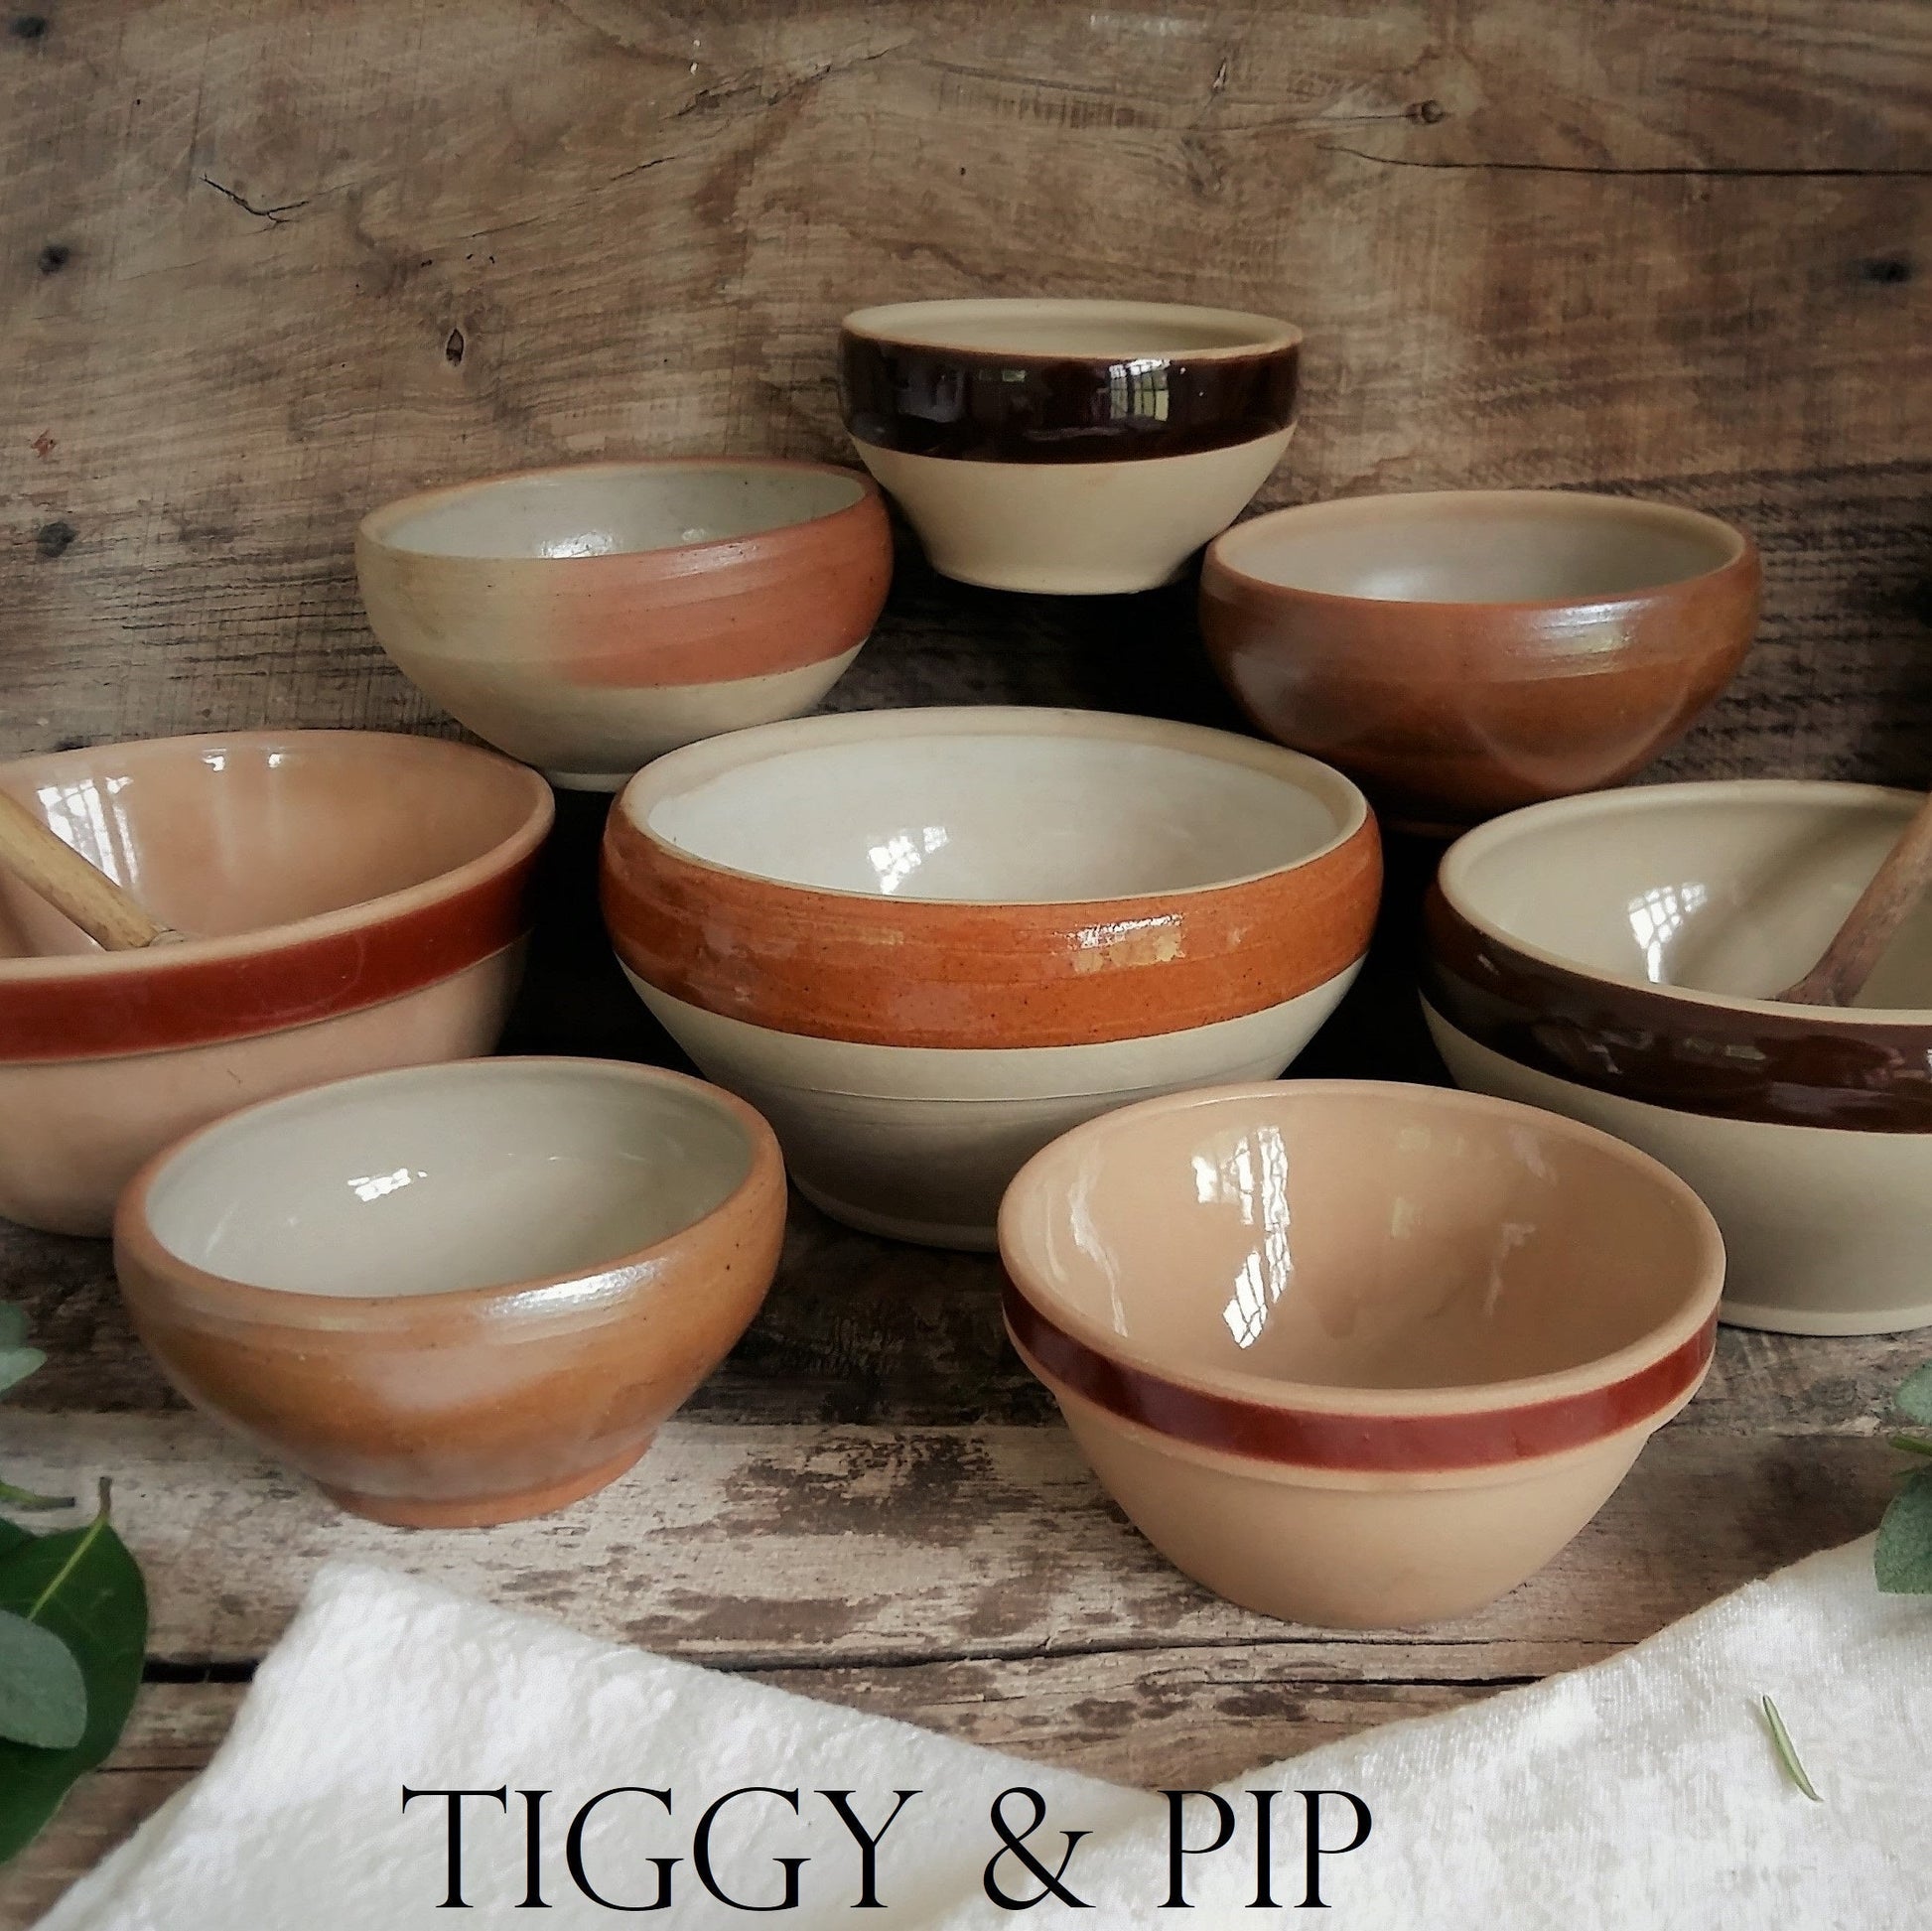 Set of EIGHT Confit Bowls from Tiggy & Pip - €168.00! Shop now at Tiggy and Pip